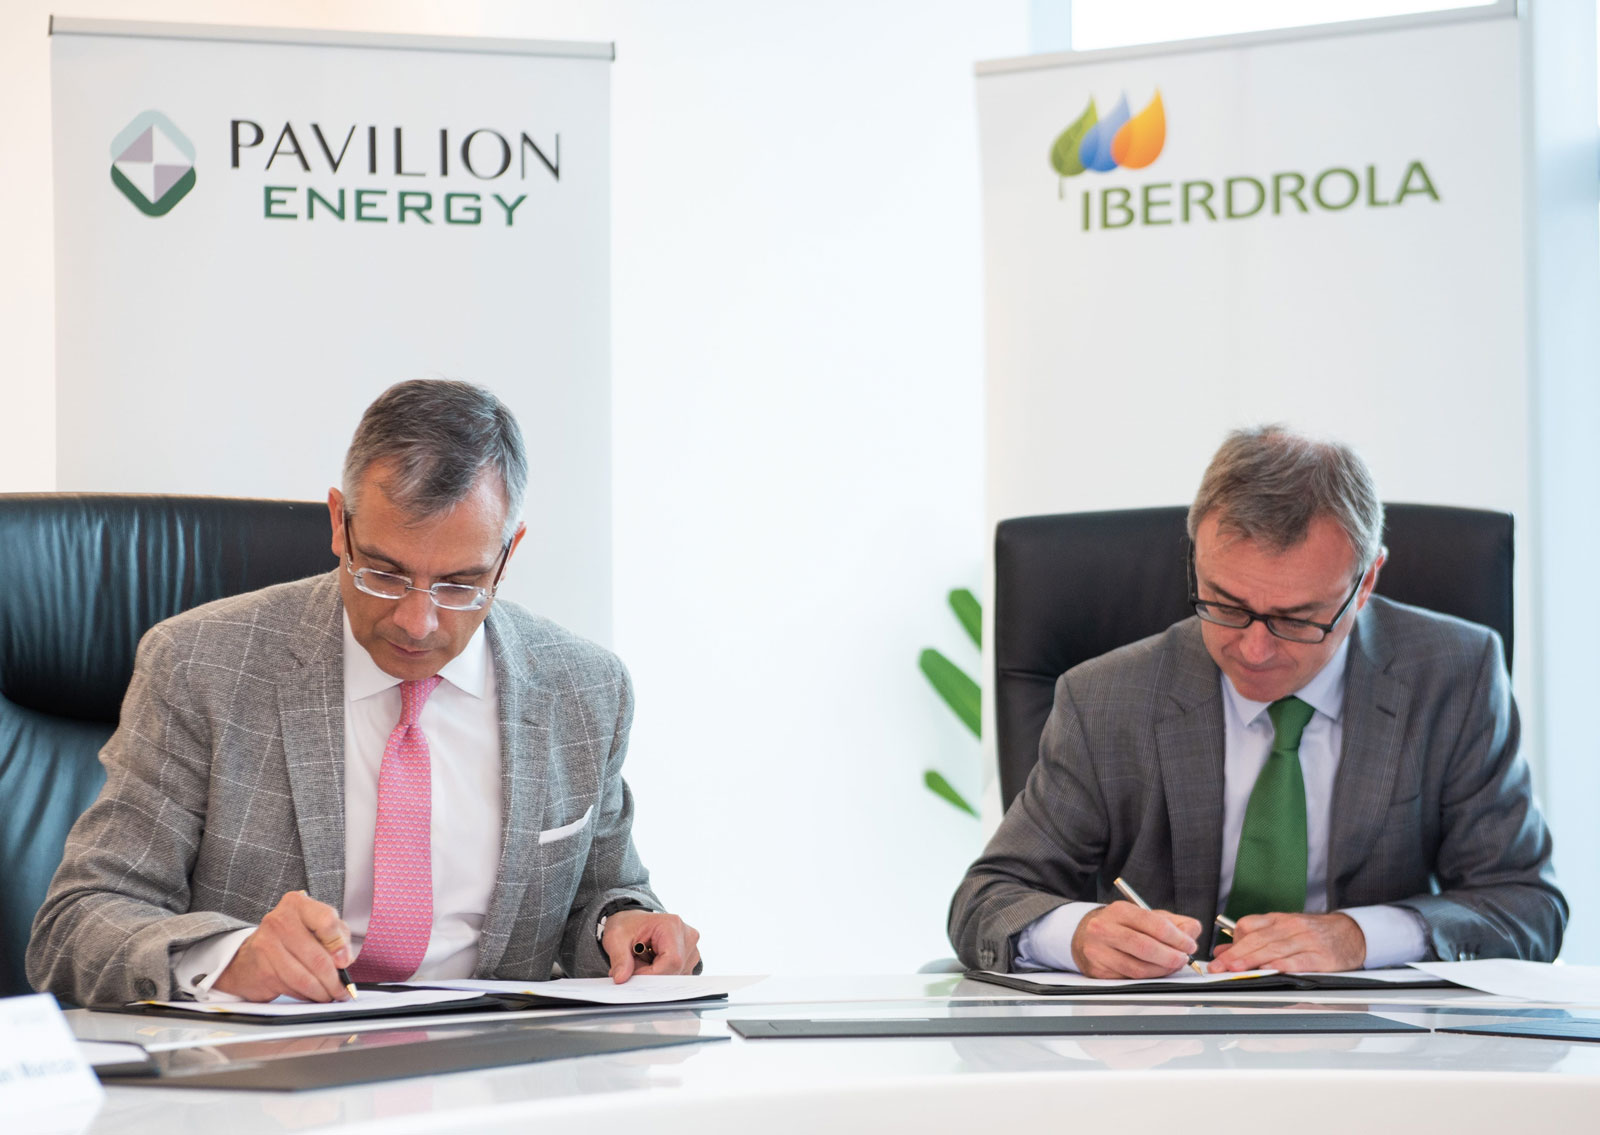 (L to R) Mr Frédéric H. Barnaud, Group CEO of Pavilion Energy and Mr Aitor Moso, CEO of Liberalised Business, Iberdrola.